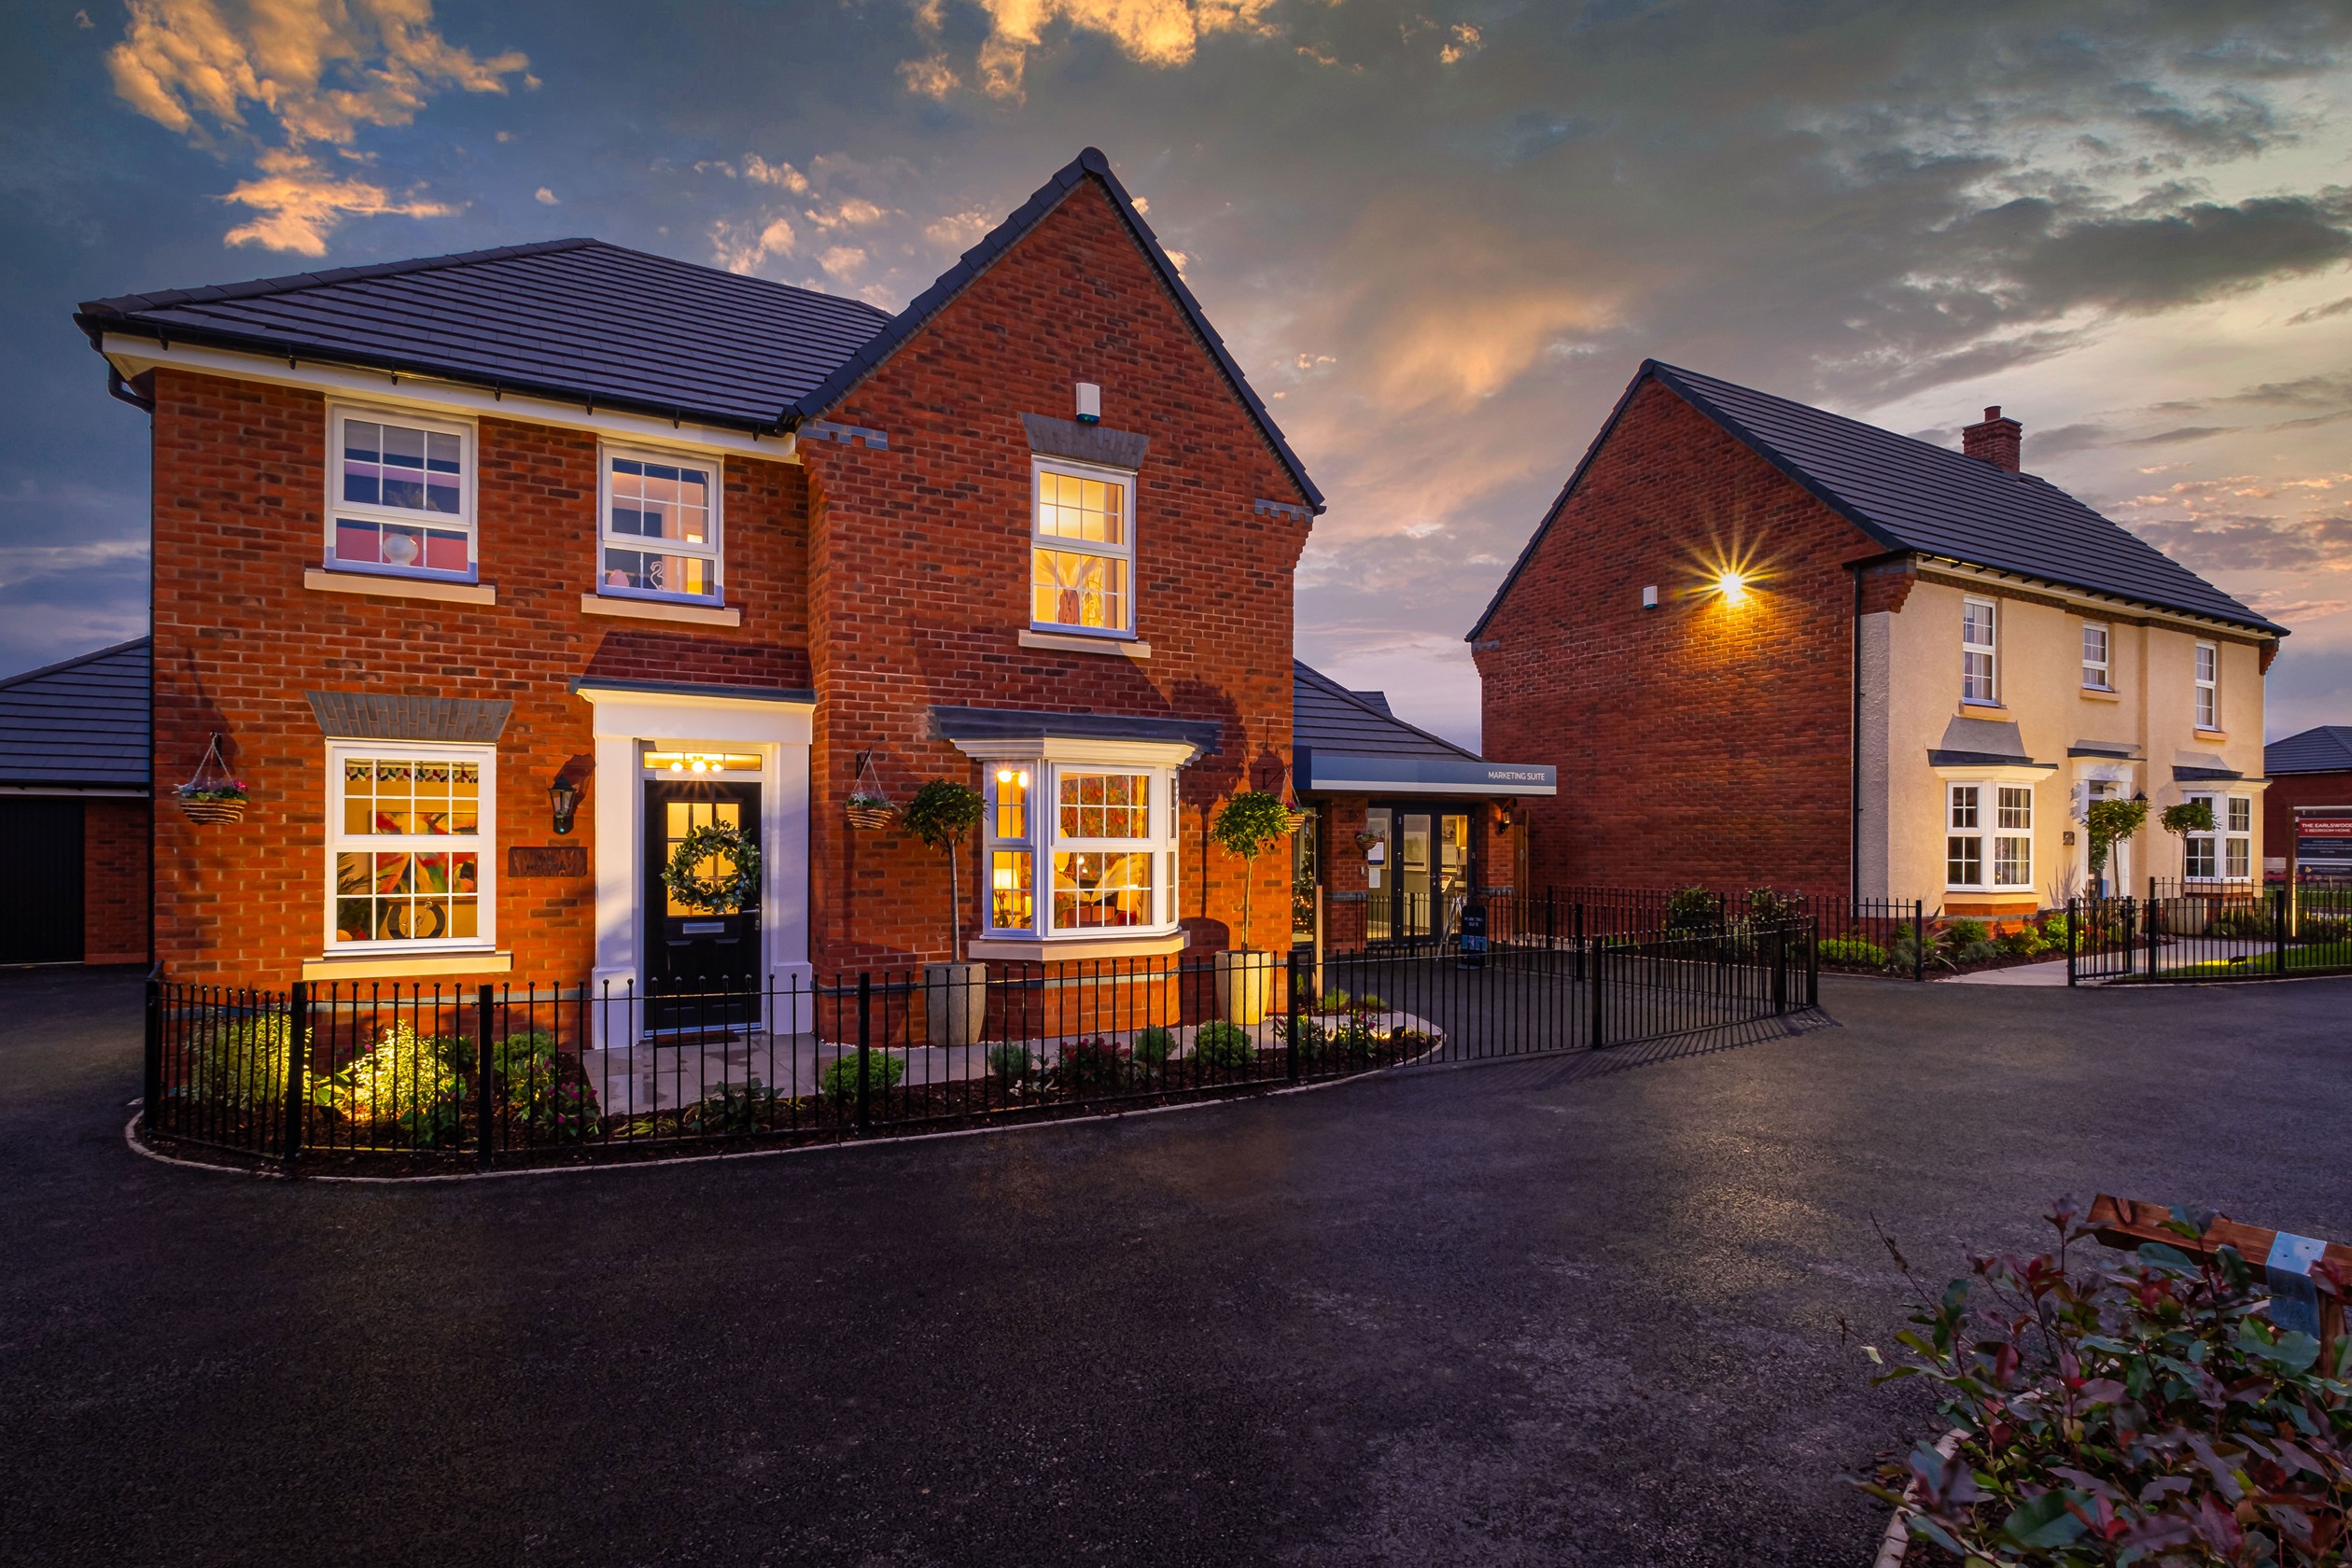 Two detached show homes lit up at dusk